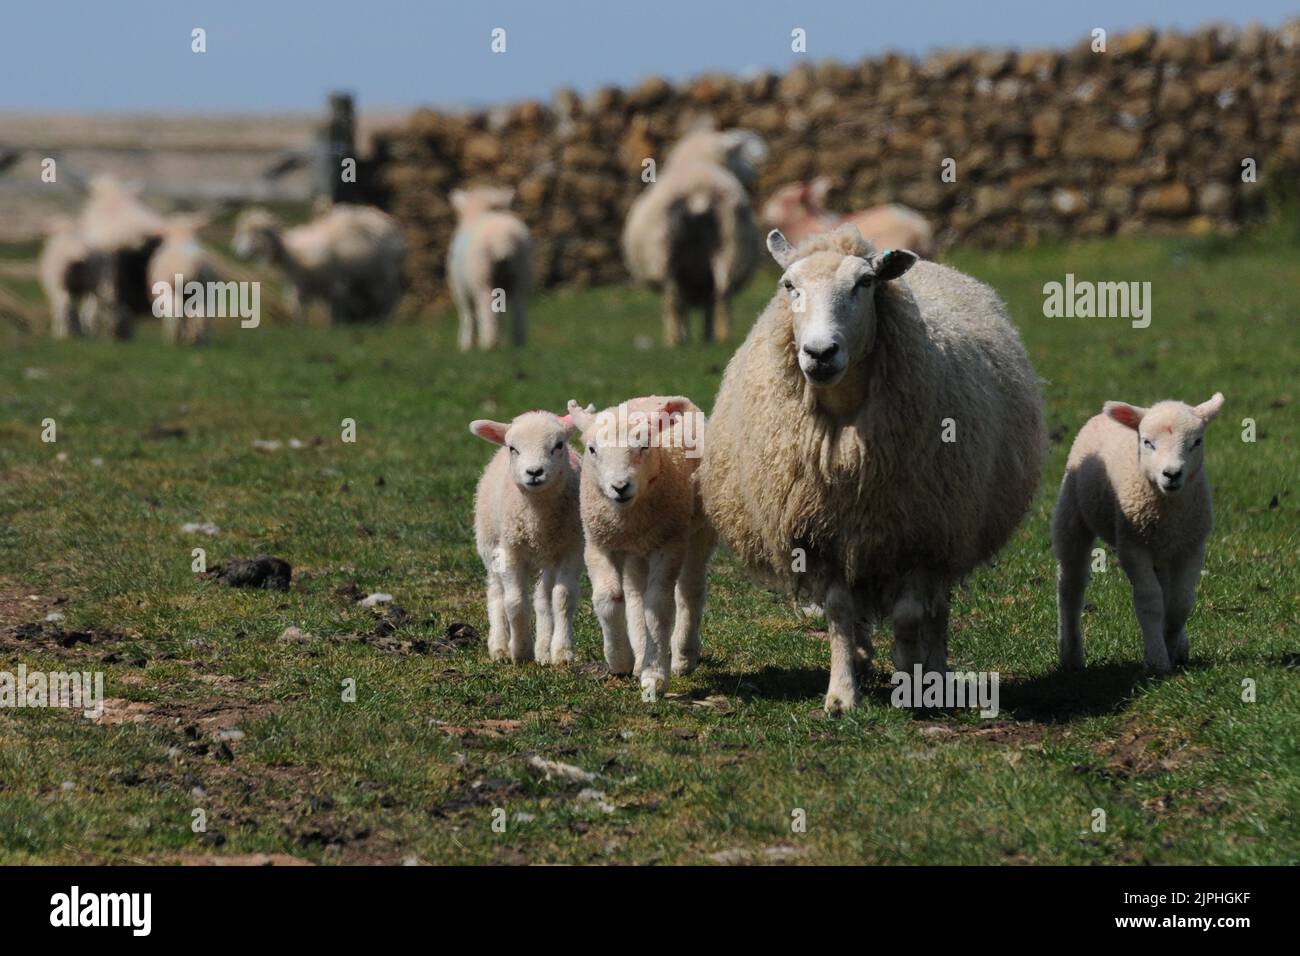 SHEEP, EWE AND LAMBS AT ABBOTSBURY, DORSET  MIKE WALKER PICTURES, 2010 Stock Photo